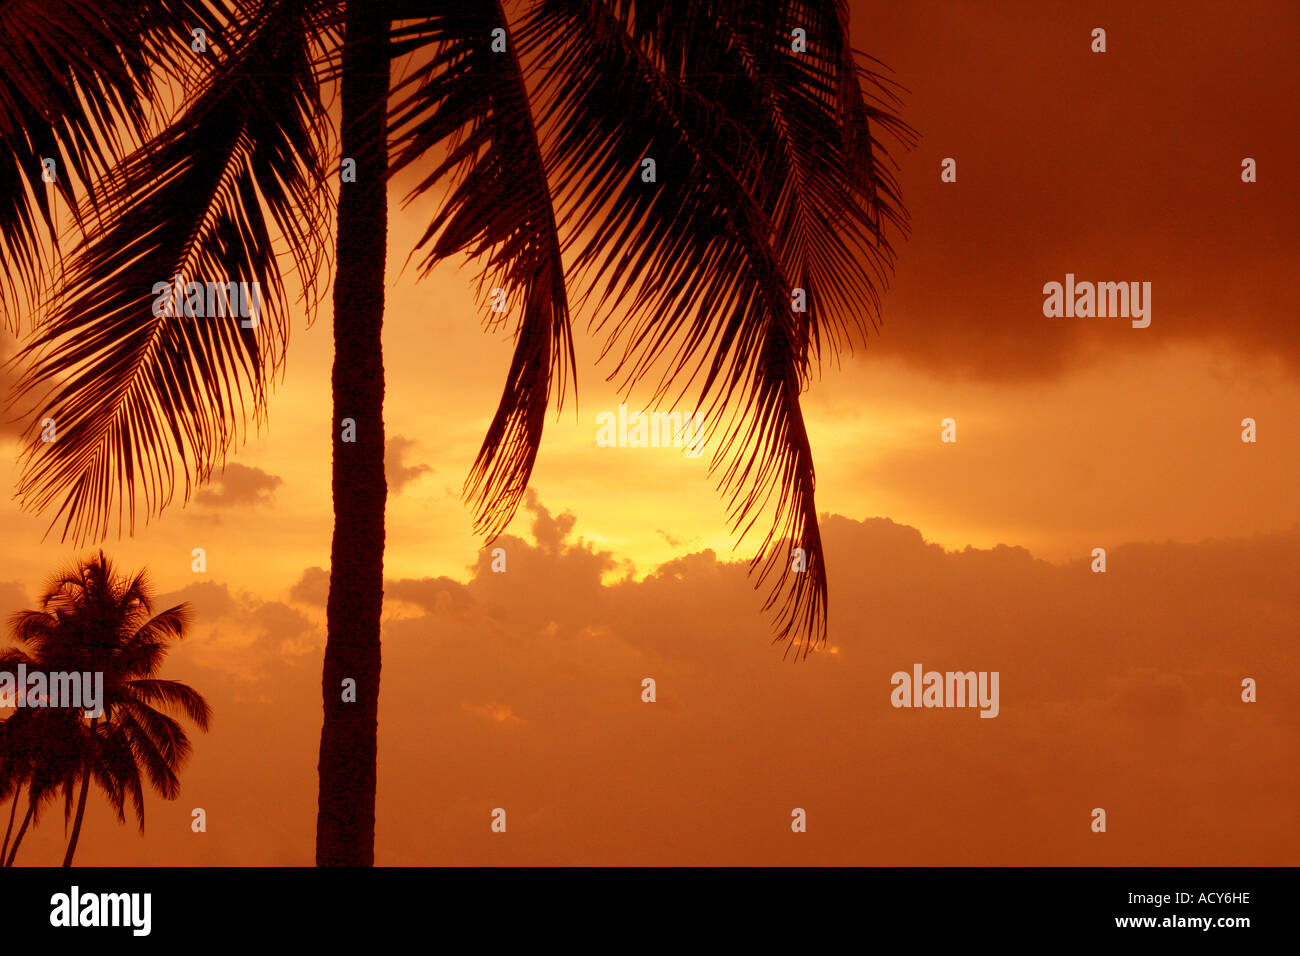 Coconut palms silhouette at sunset Stock Photo